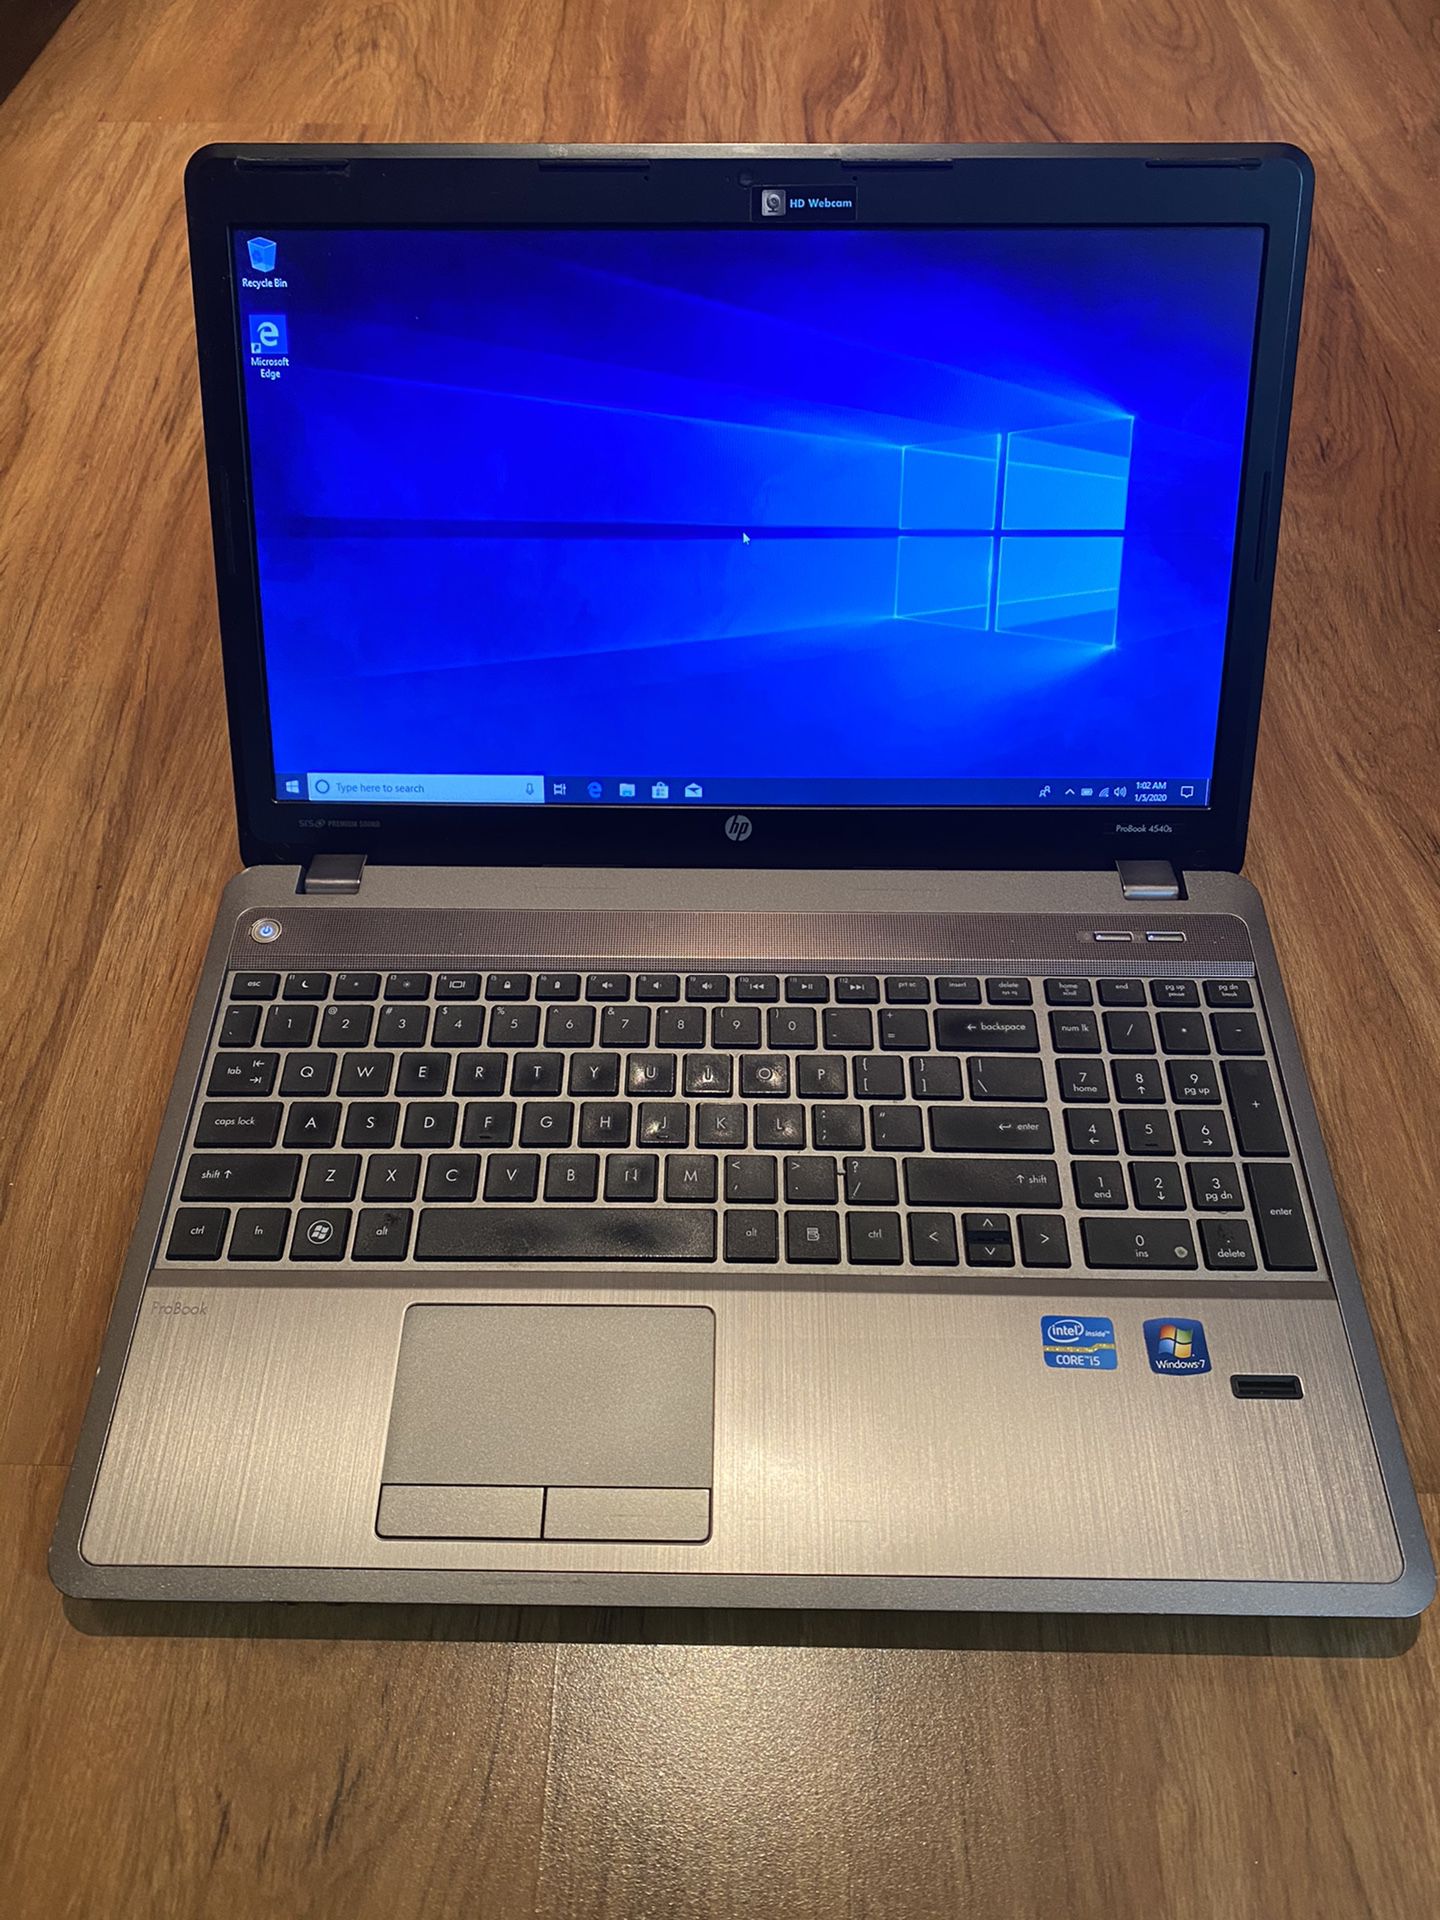 HP ProBook 4530s core i5 2nd gen 4GBRam 500GB Hard Drive 15.6 inch Screen Windows 10 Pro Laptop with HDMI output & charger in Excellent Working cond